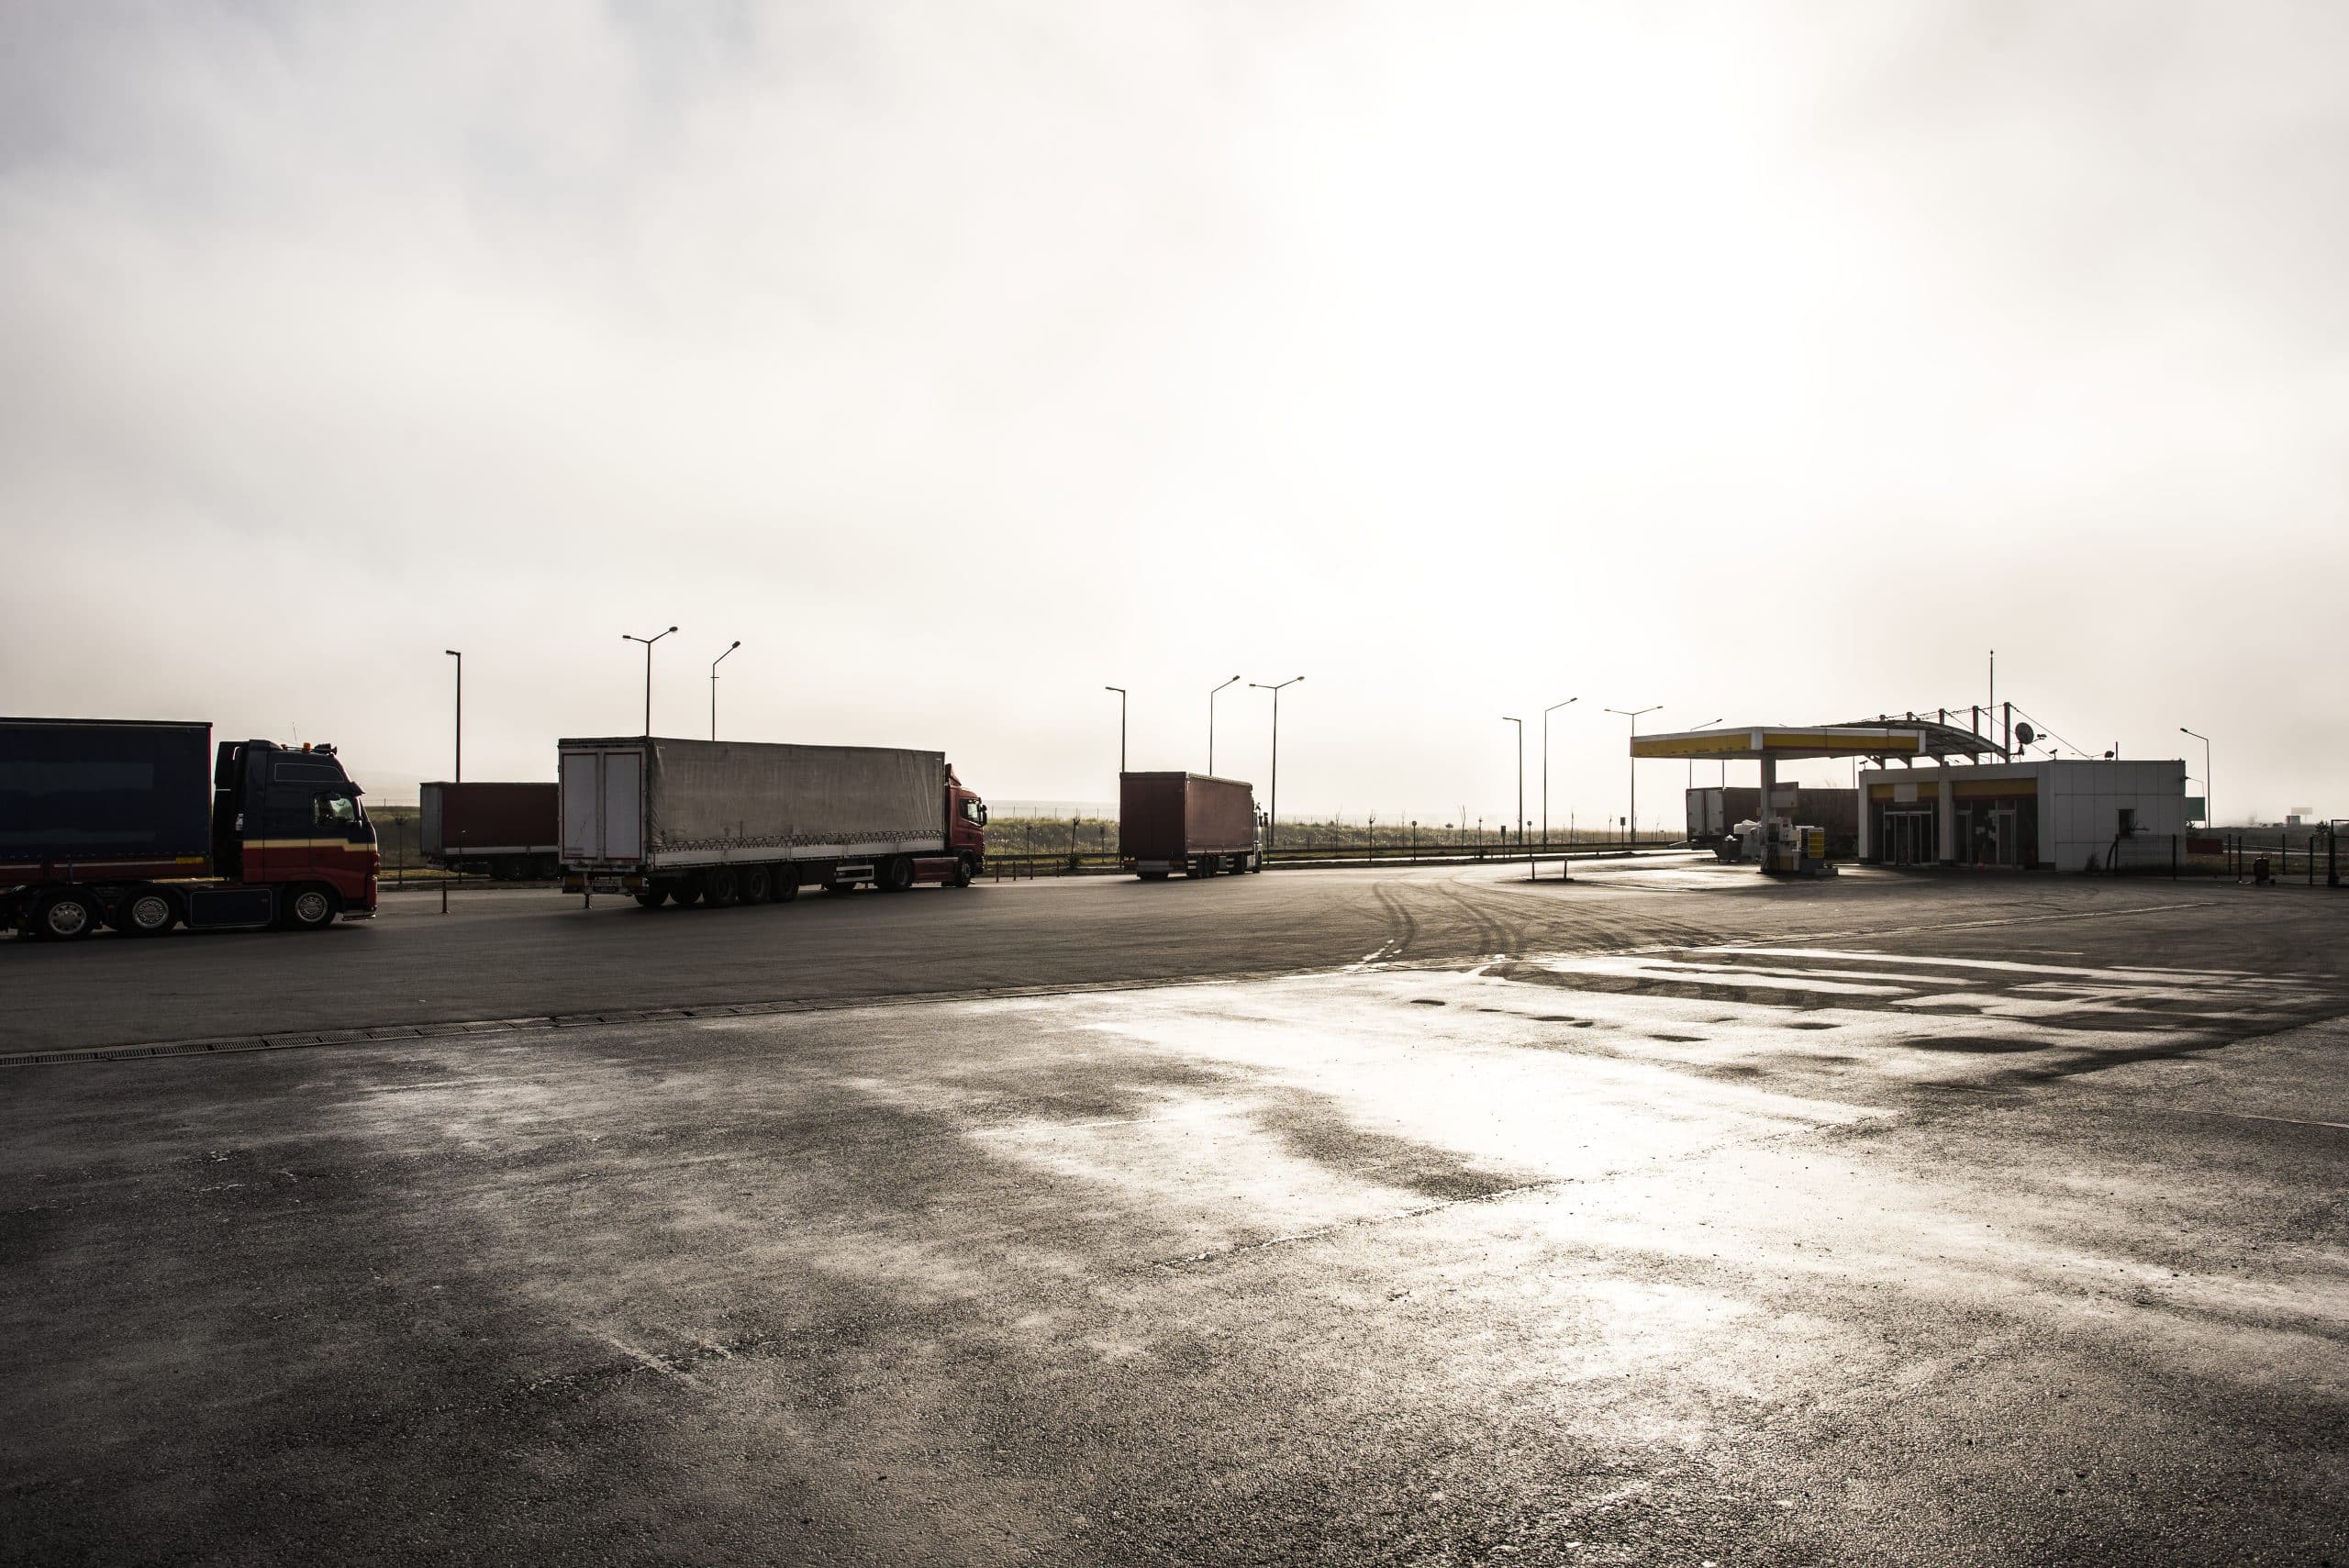 Tips for starting a successful truck wash business